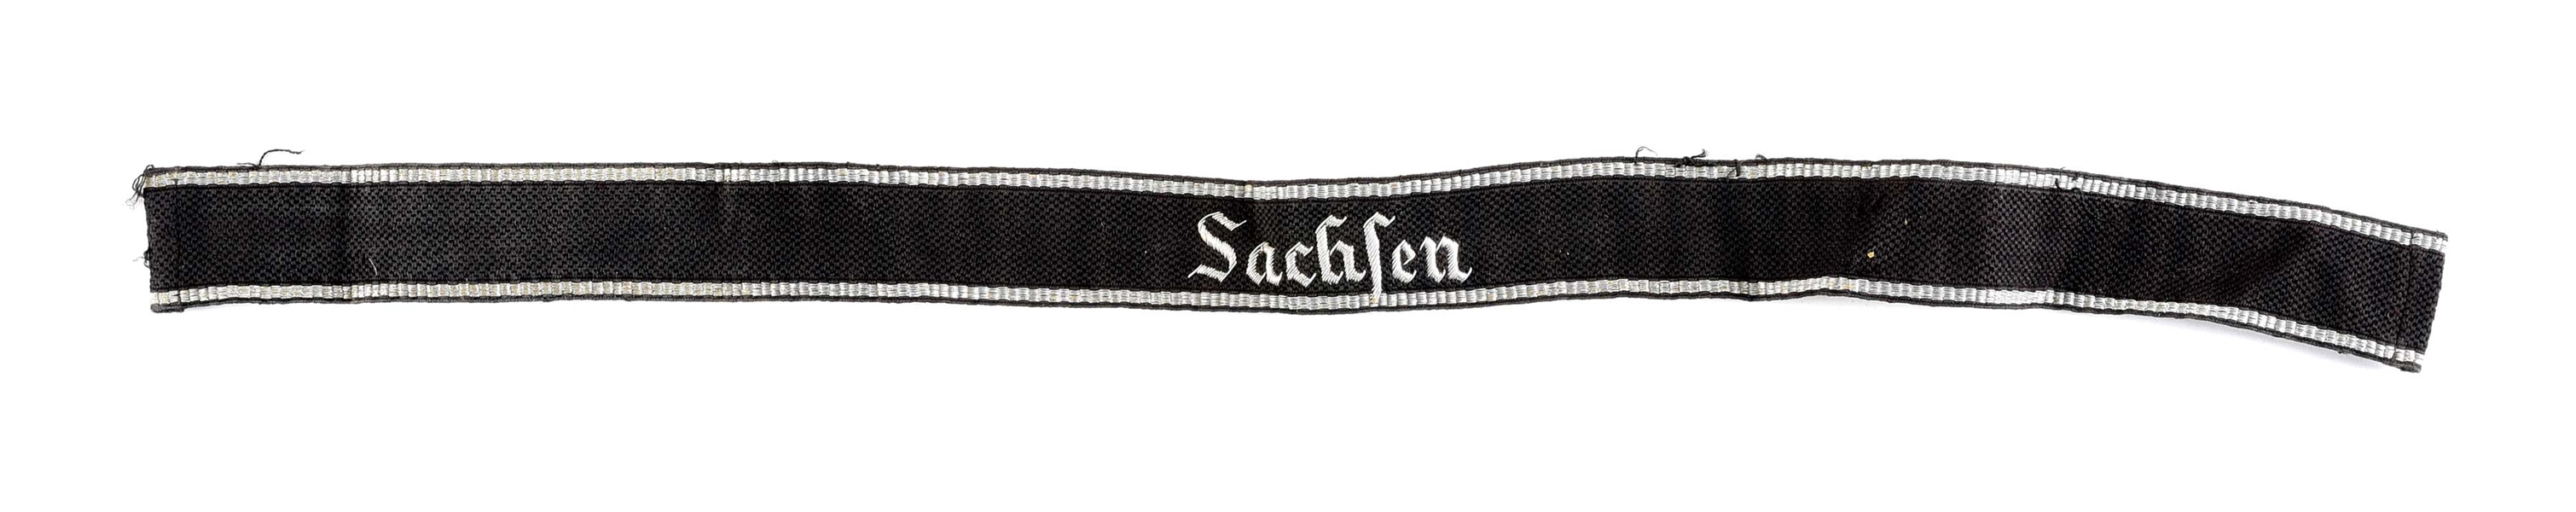 RARE AND HISTORICAL SS CUFF TITLE "SACHSEN" IN HAND EMBROIDERED BULLION